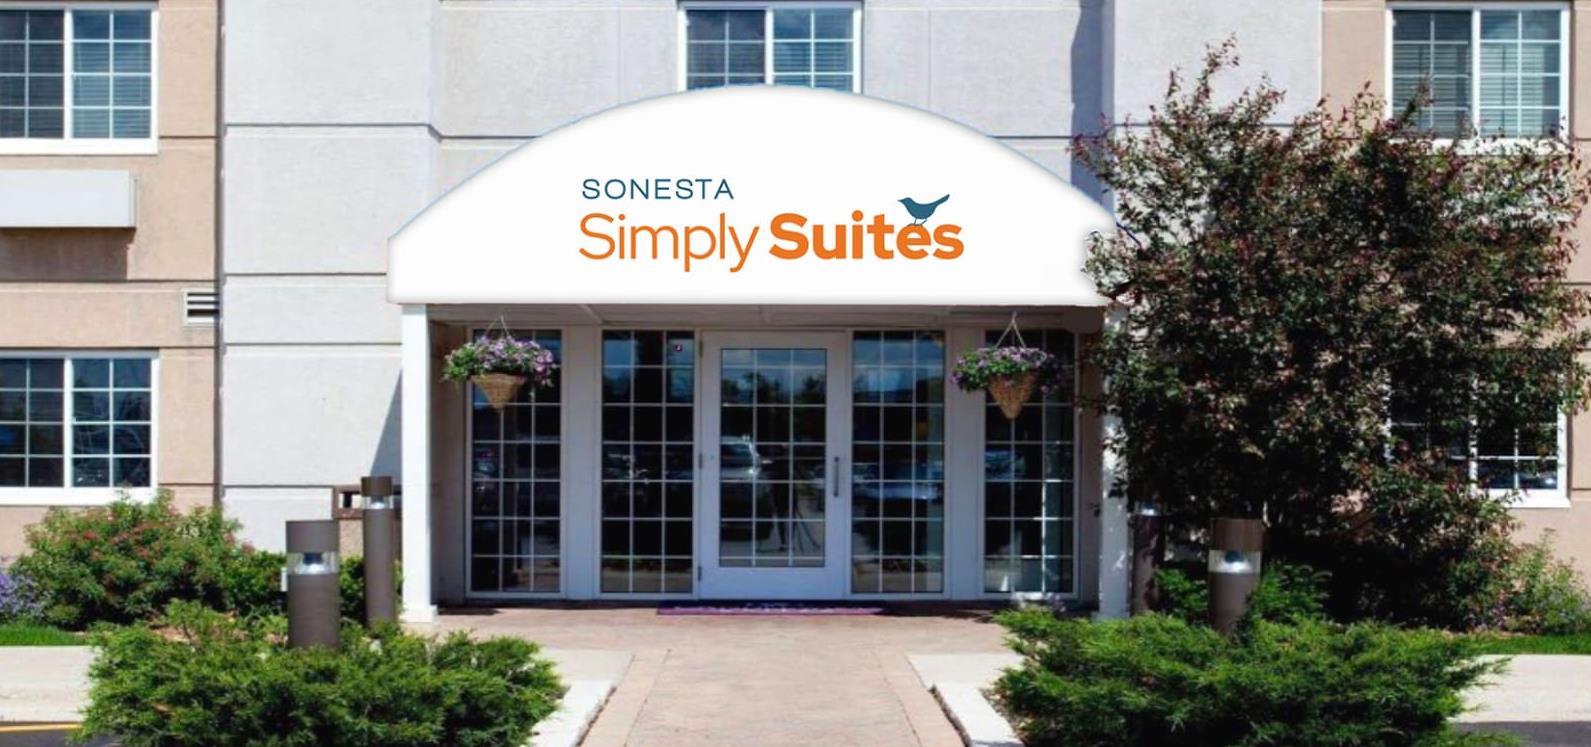 Sonesta Simply Suites Chicago O"Hare Airport in Waukegan, IL